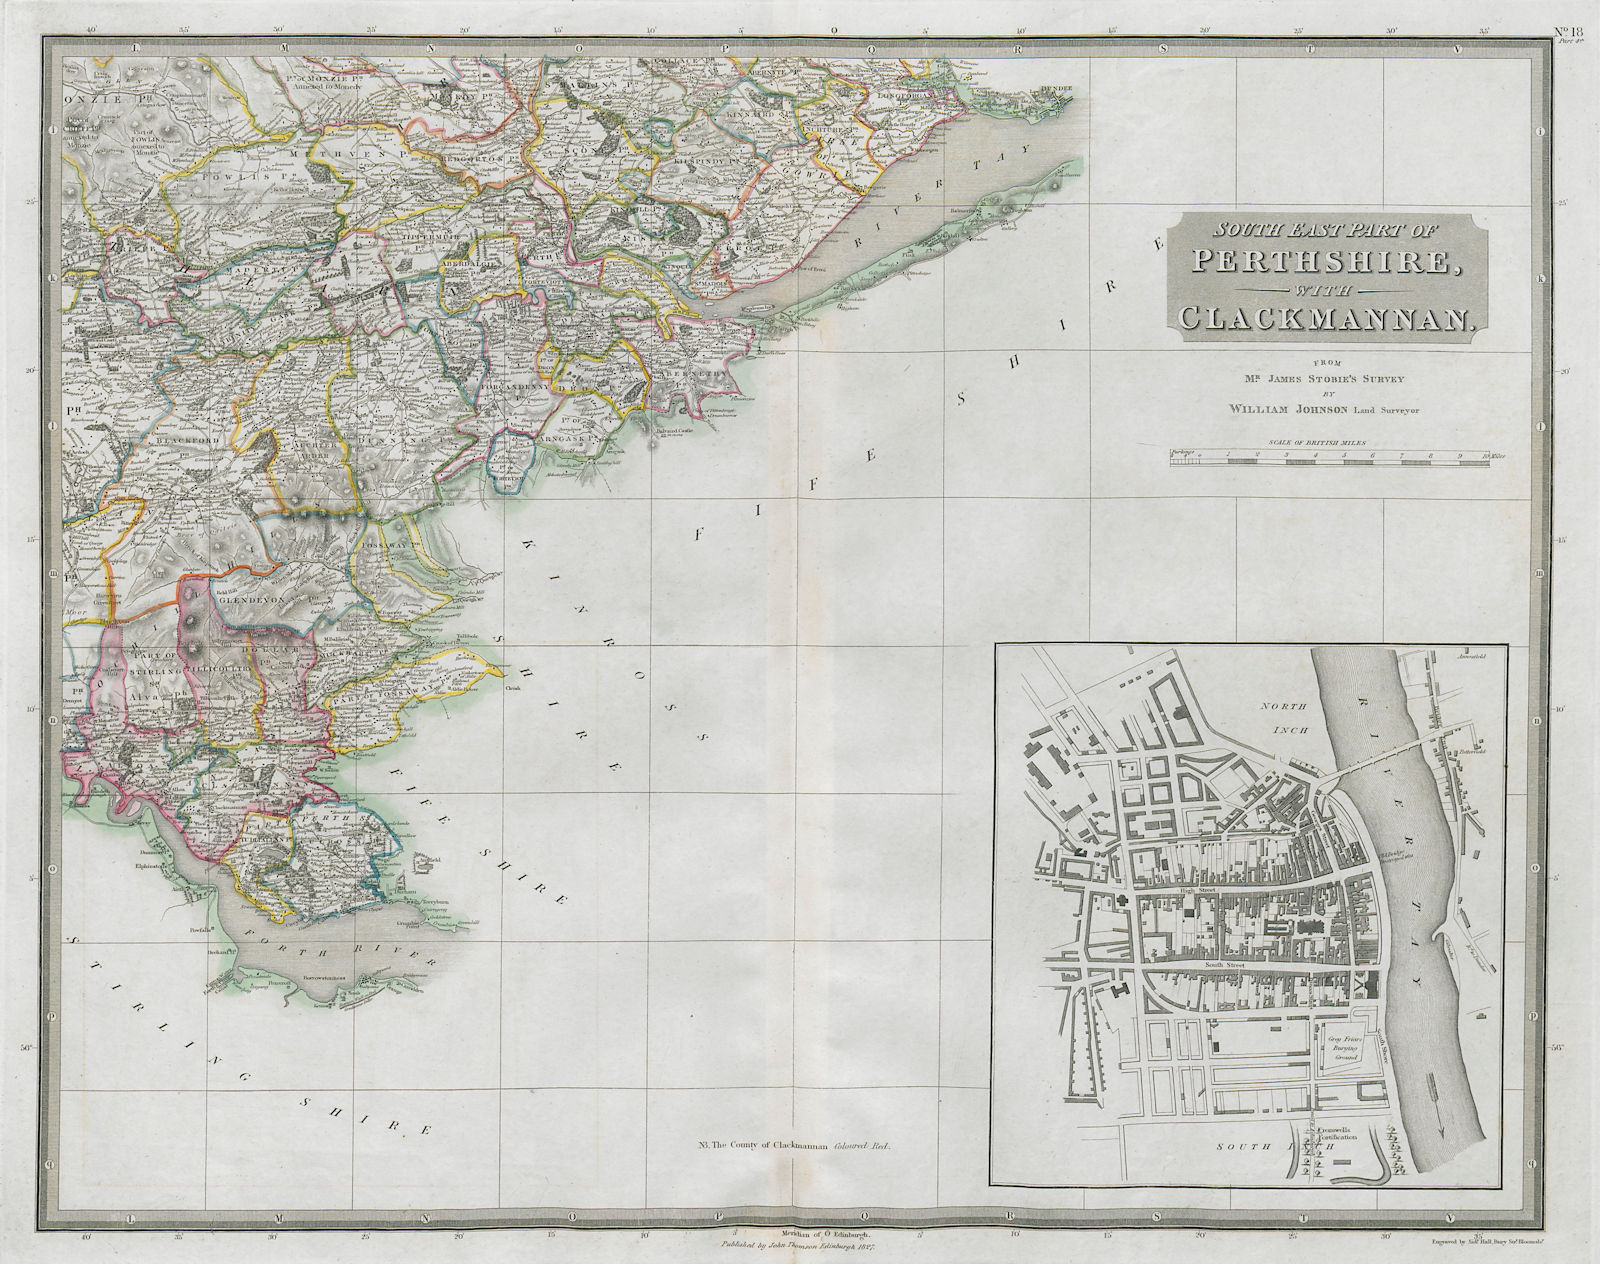 South east Perthshire & Clackmannanshire. Dundee Gleneagles. THOMSON 1832 map